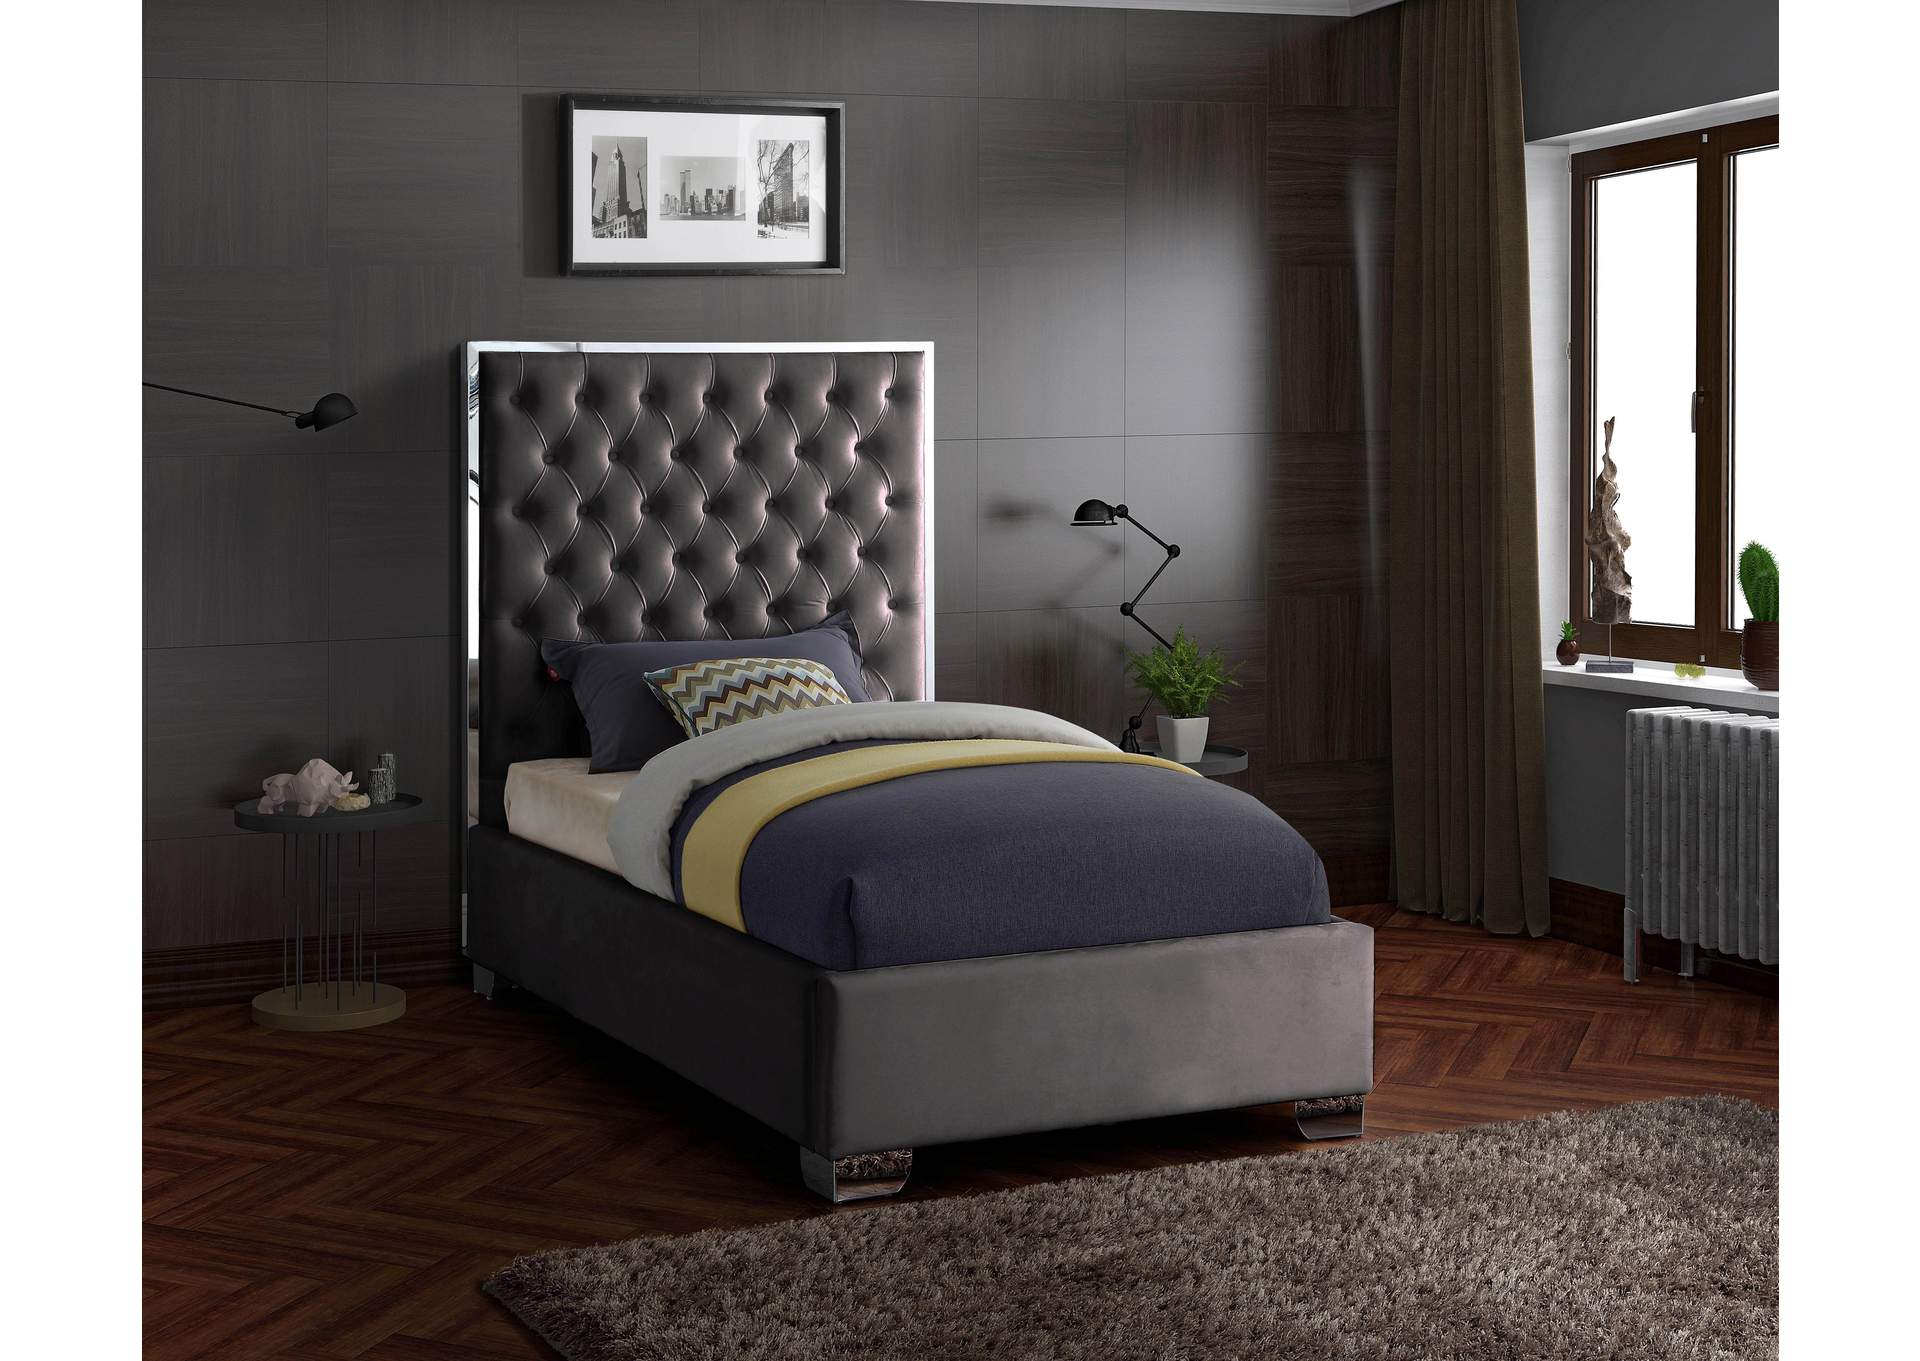 Lexi Grey Velvet Twin Bed Harlem Furniture, Grey Twin Headboard With Studs